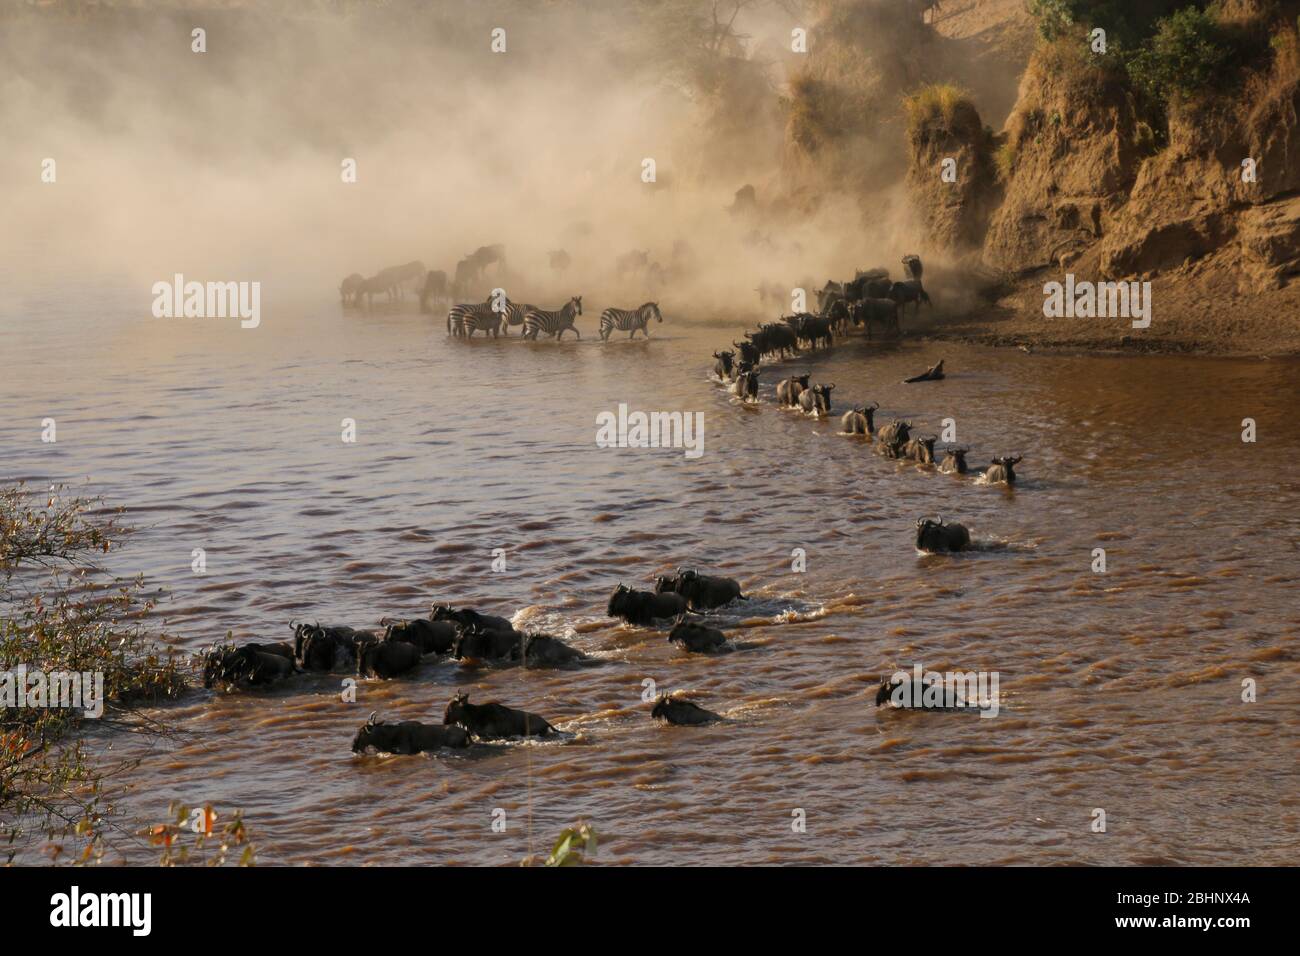 Annual migration of over one million white bearded (or brindled) wildebeest and 200,000 zebras at Serengeti National Park, Tanzania, The animals swim Stock Photo